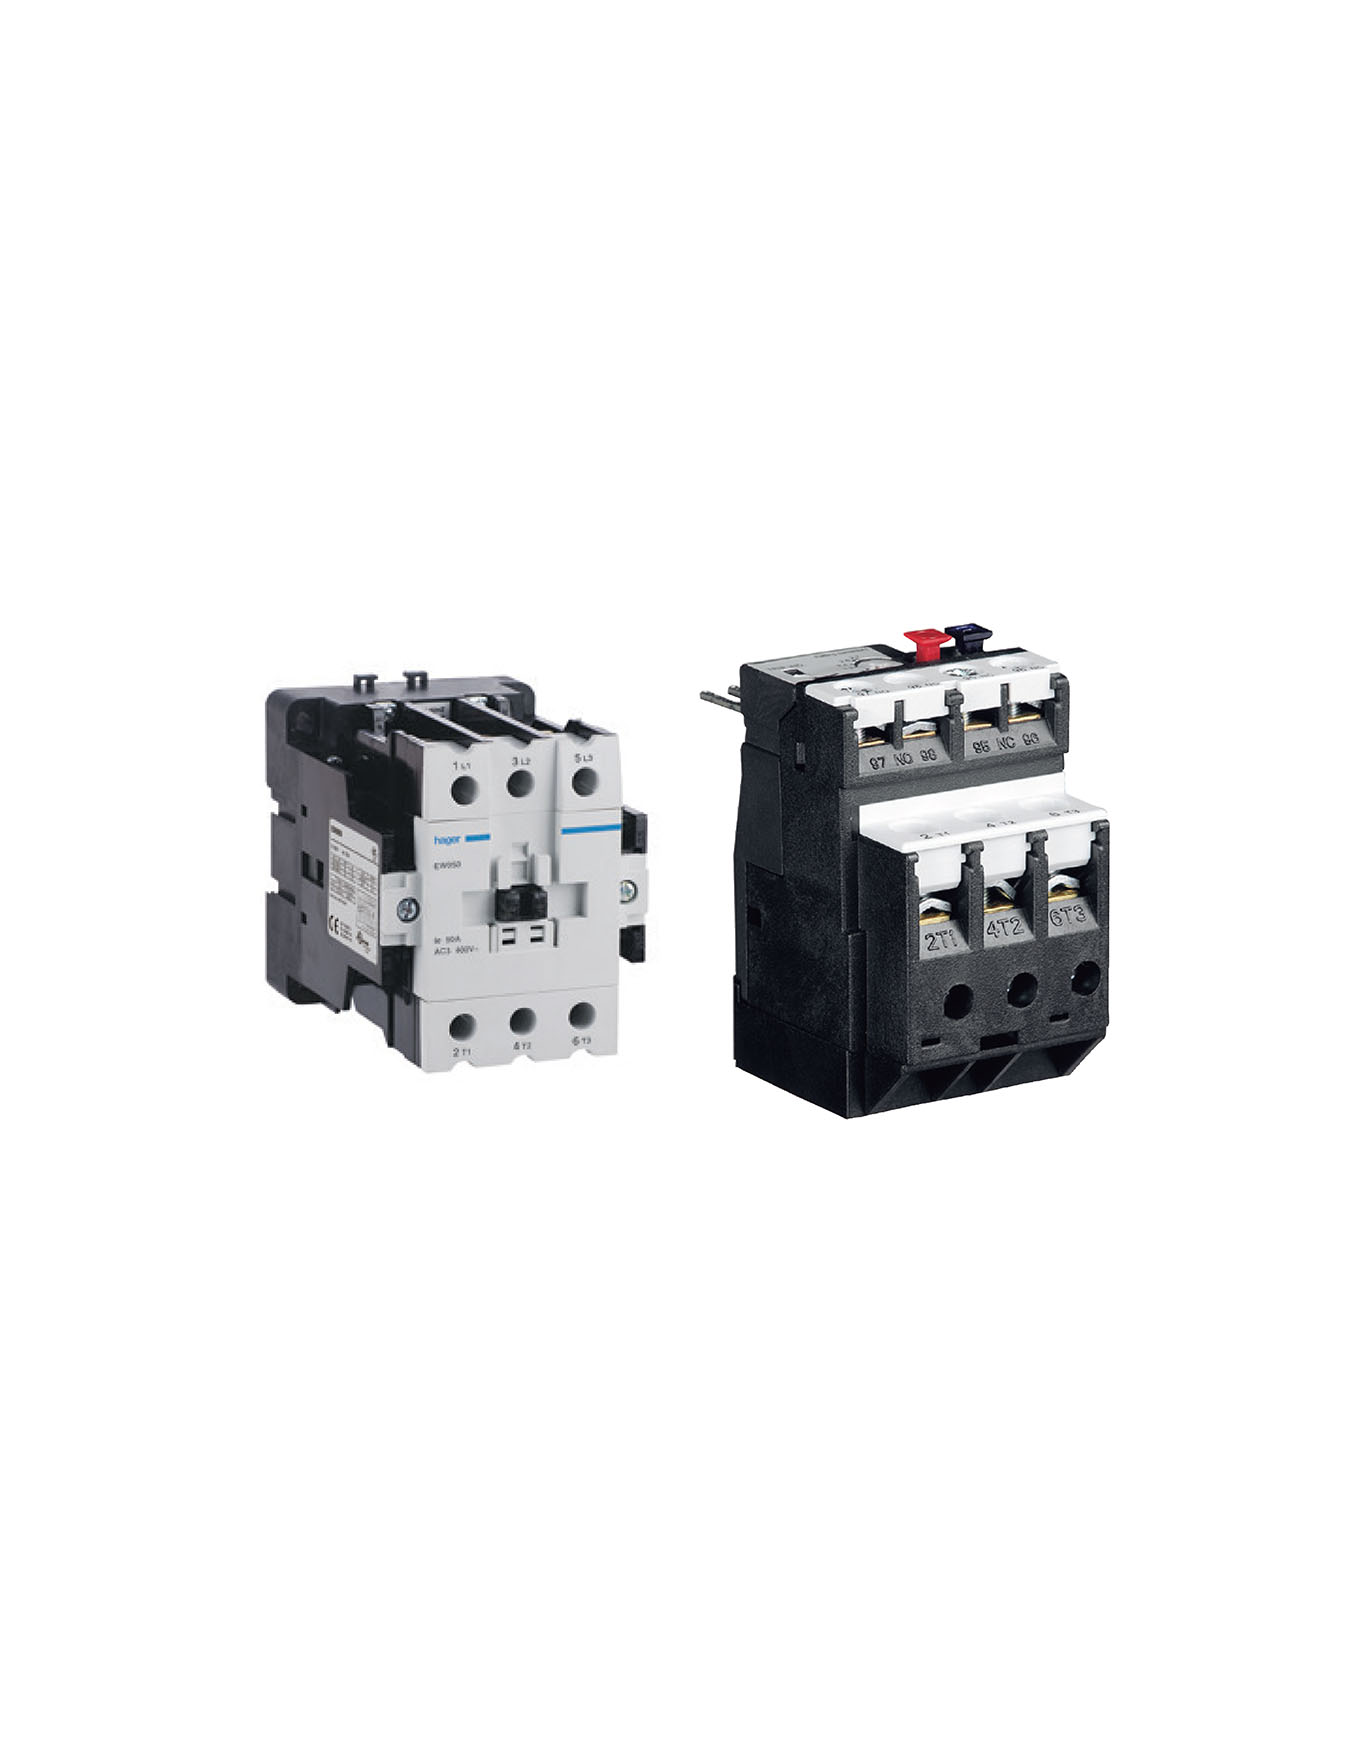 Power contactors and thermal overload relays